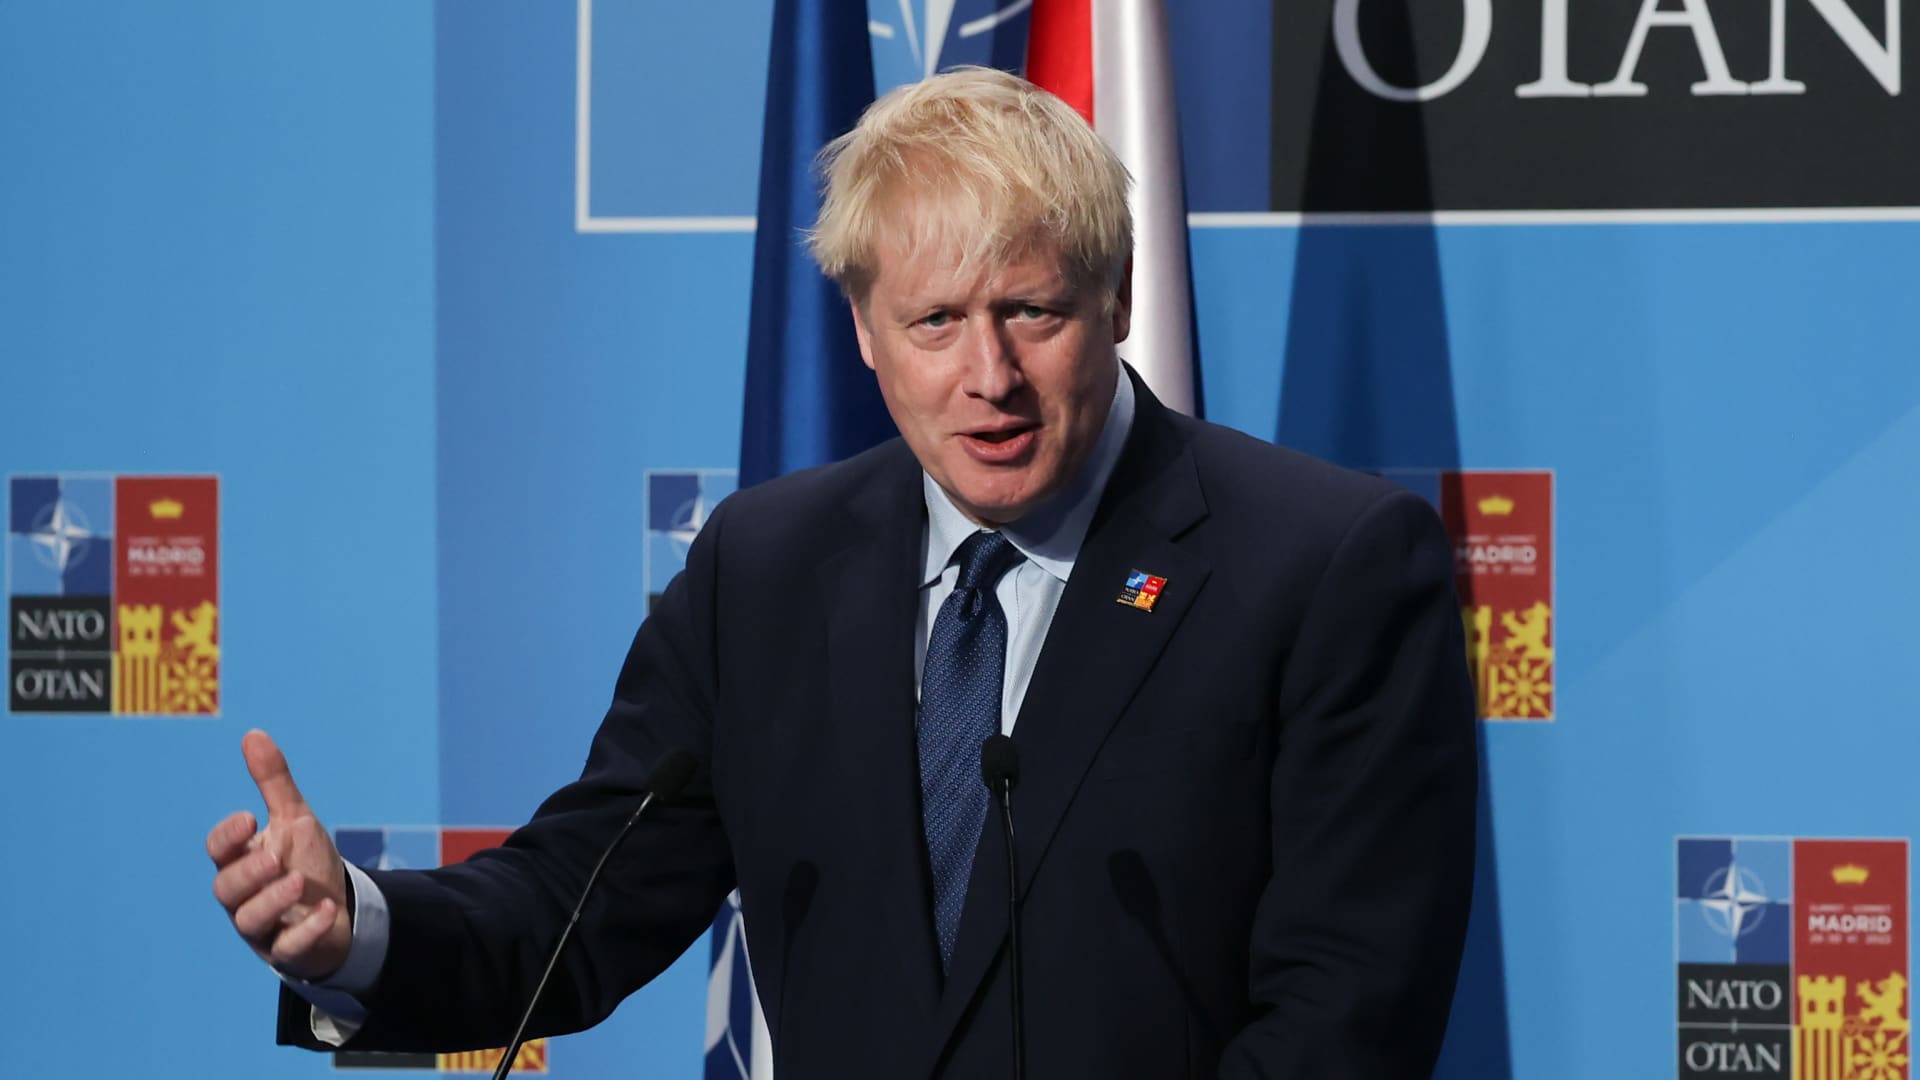 Prime Minister Of The United Kingdom Boris Johnson during the press conference on the final day of the NATO Summit in Madrid, Spain on June 30, 2022.